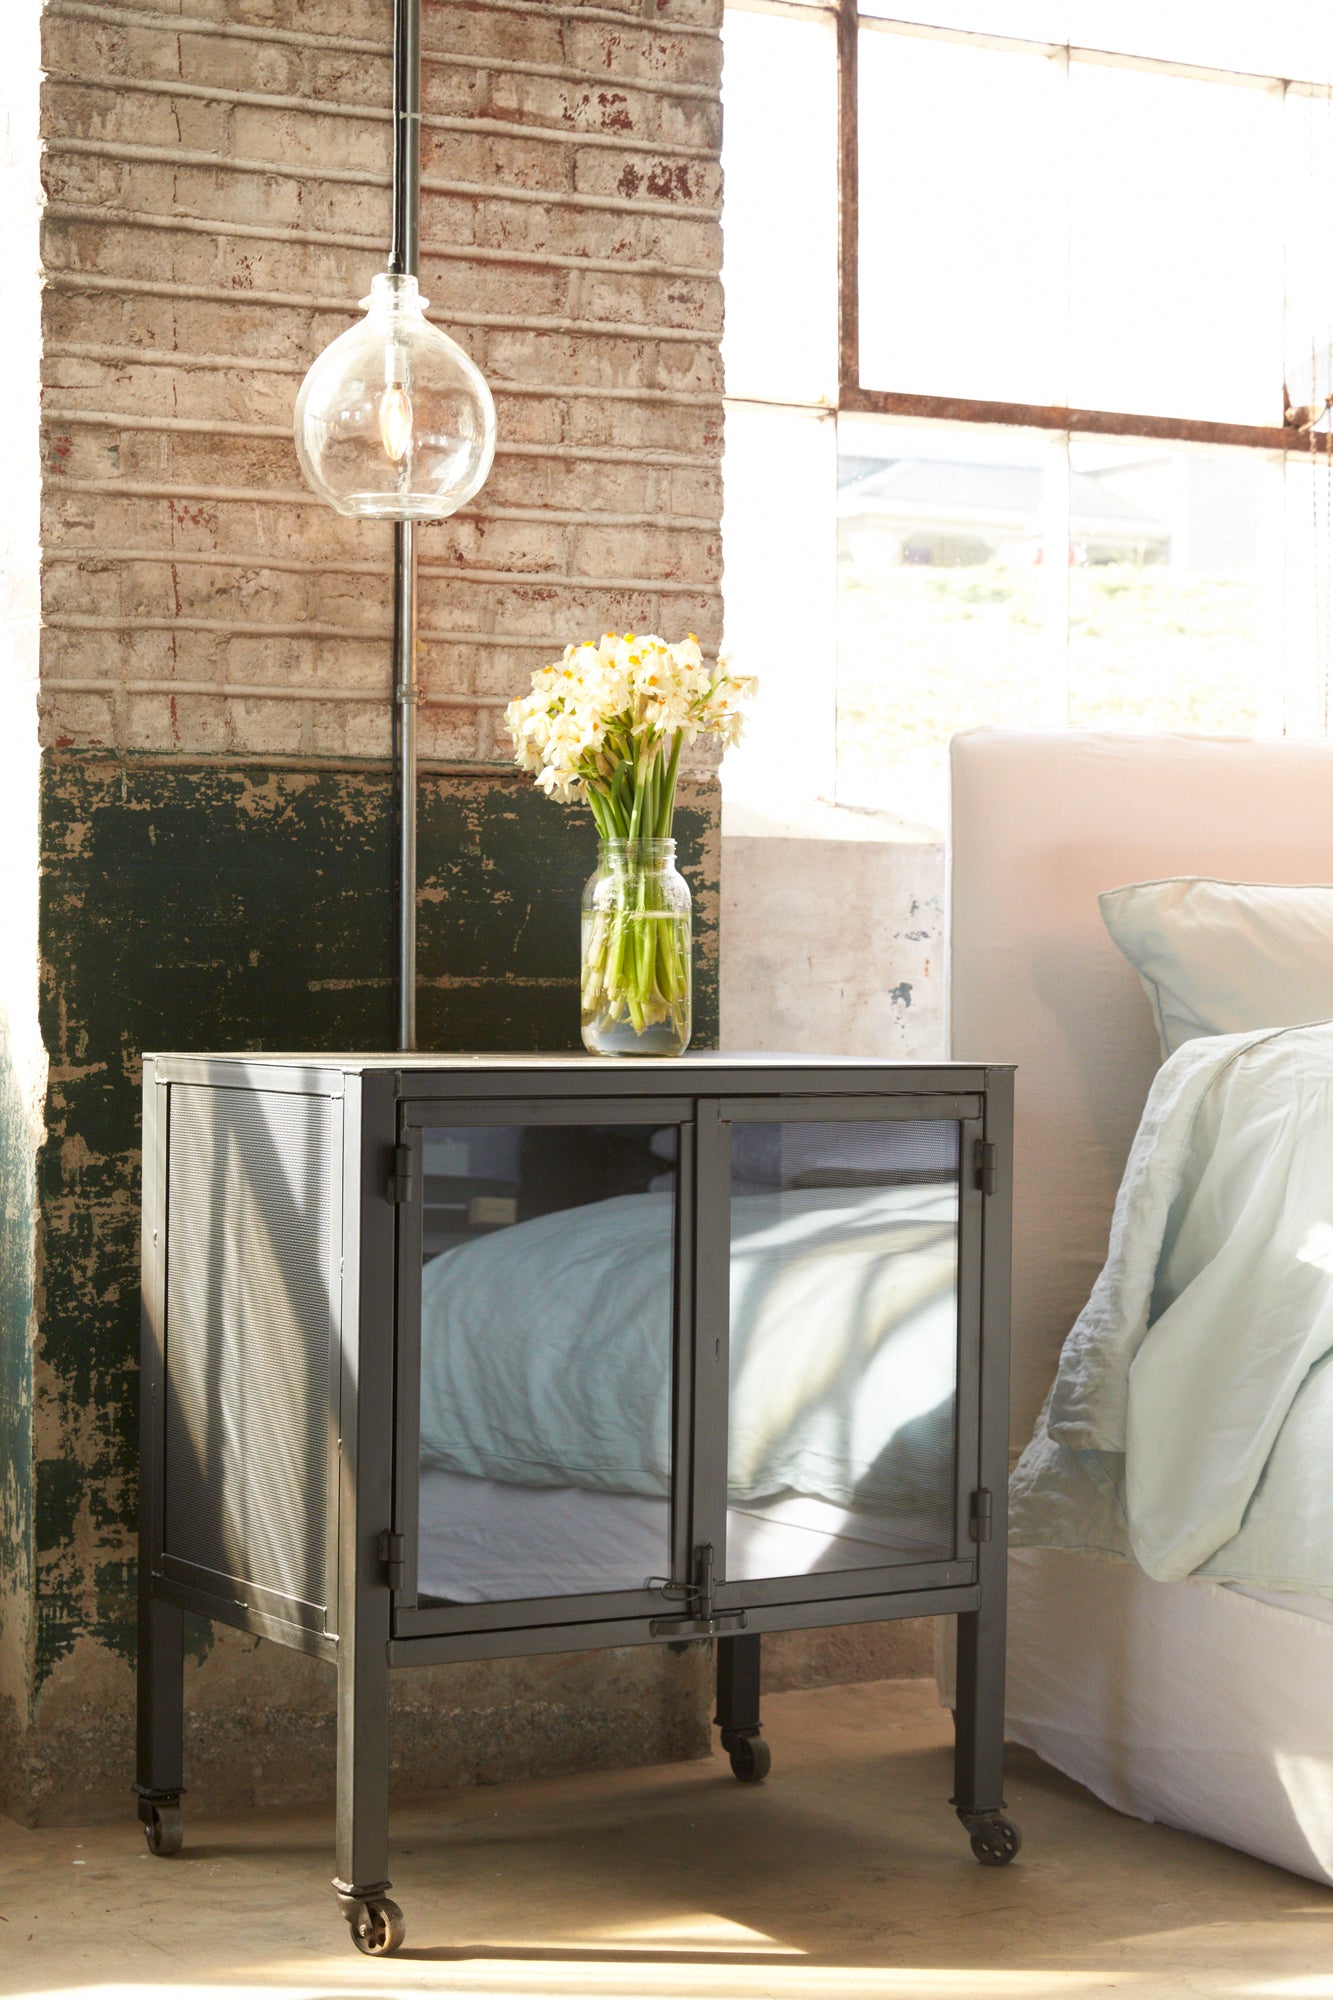  Isaac night stand in black finish with small jug lamp in clear finish. Corner shot of slipcovered bed in white finish.  